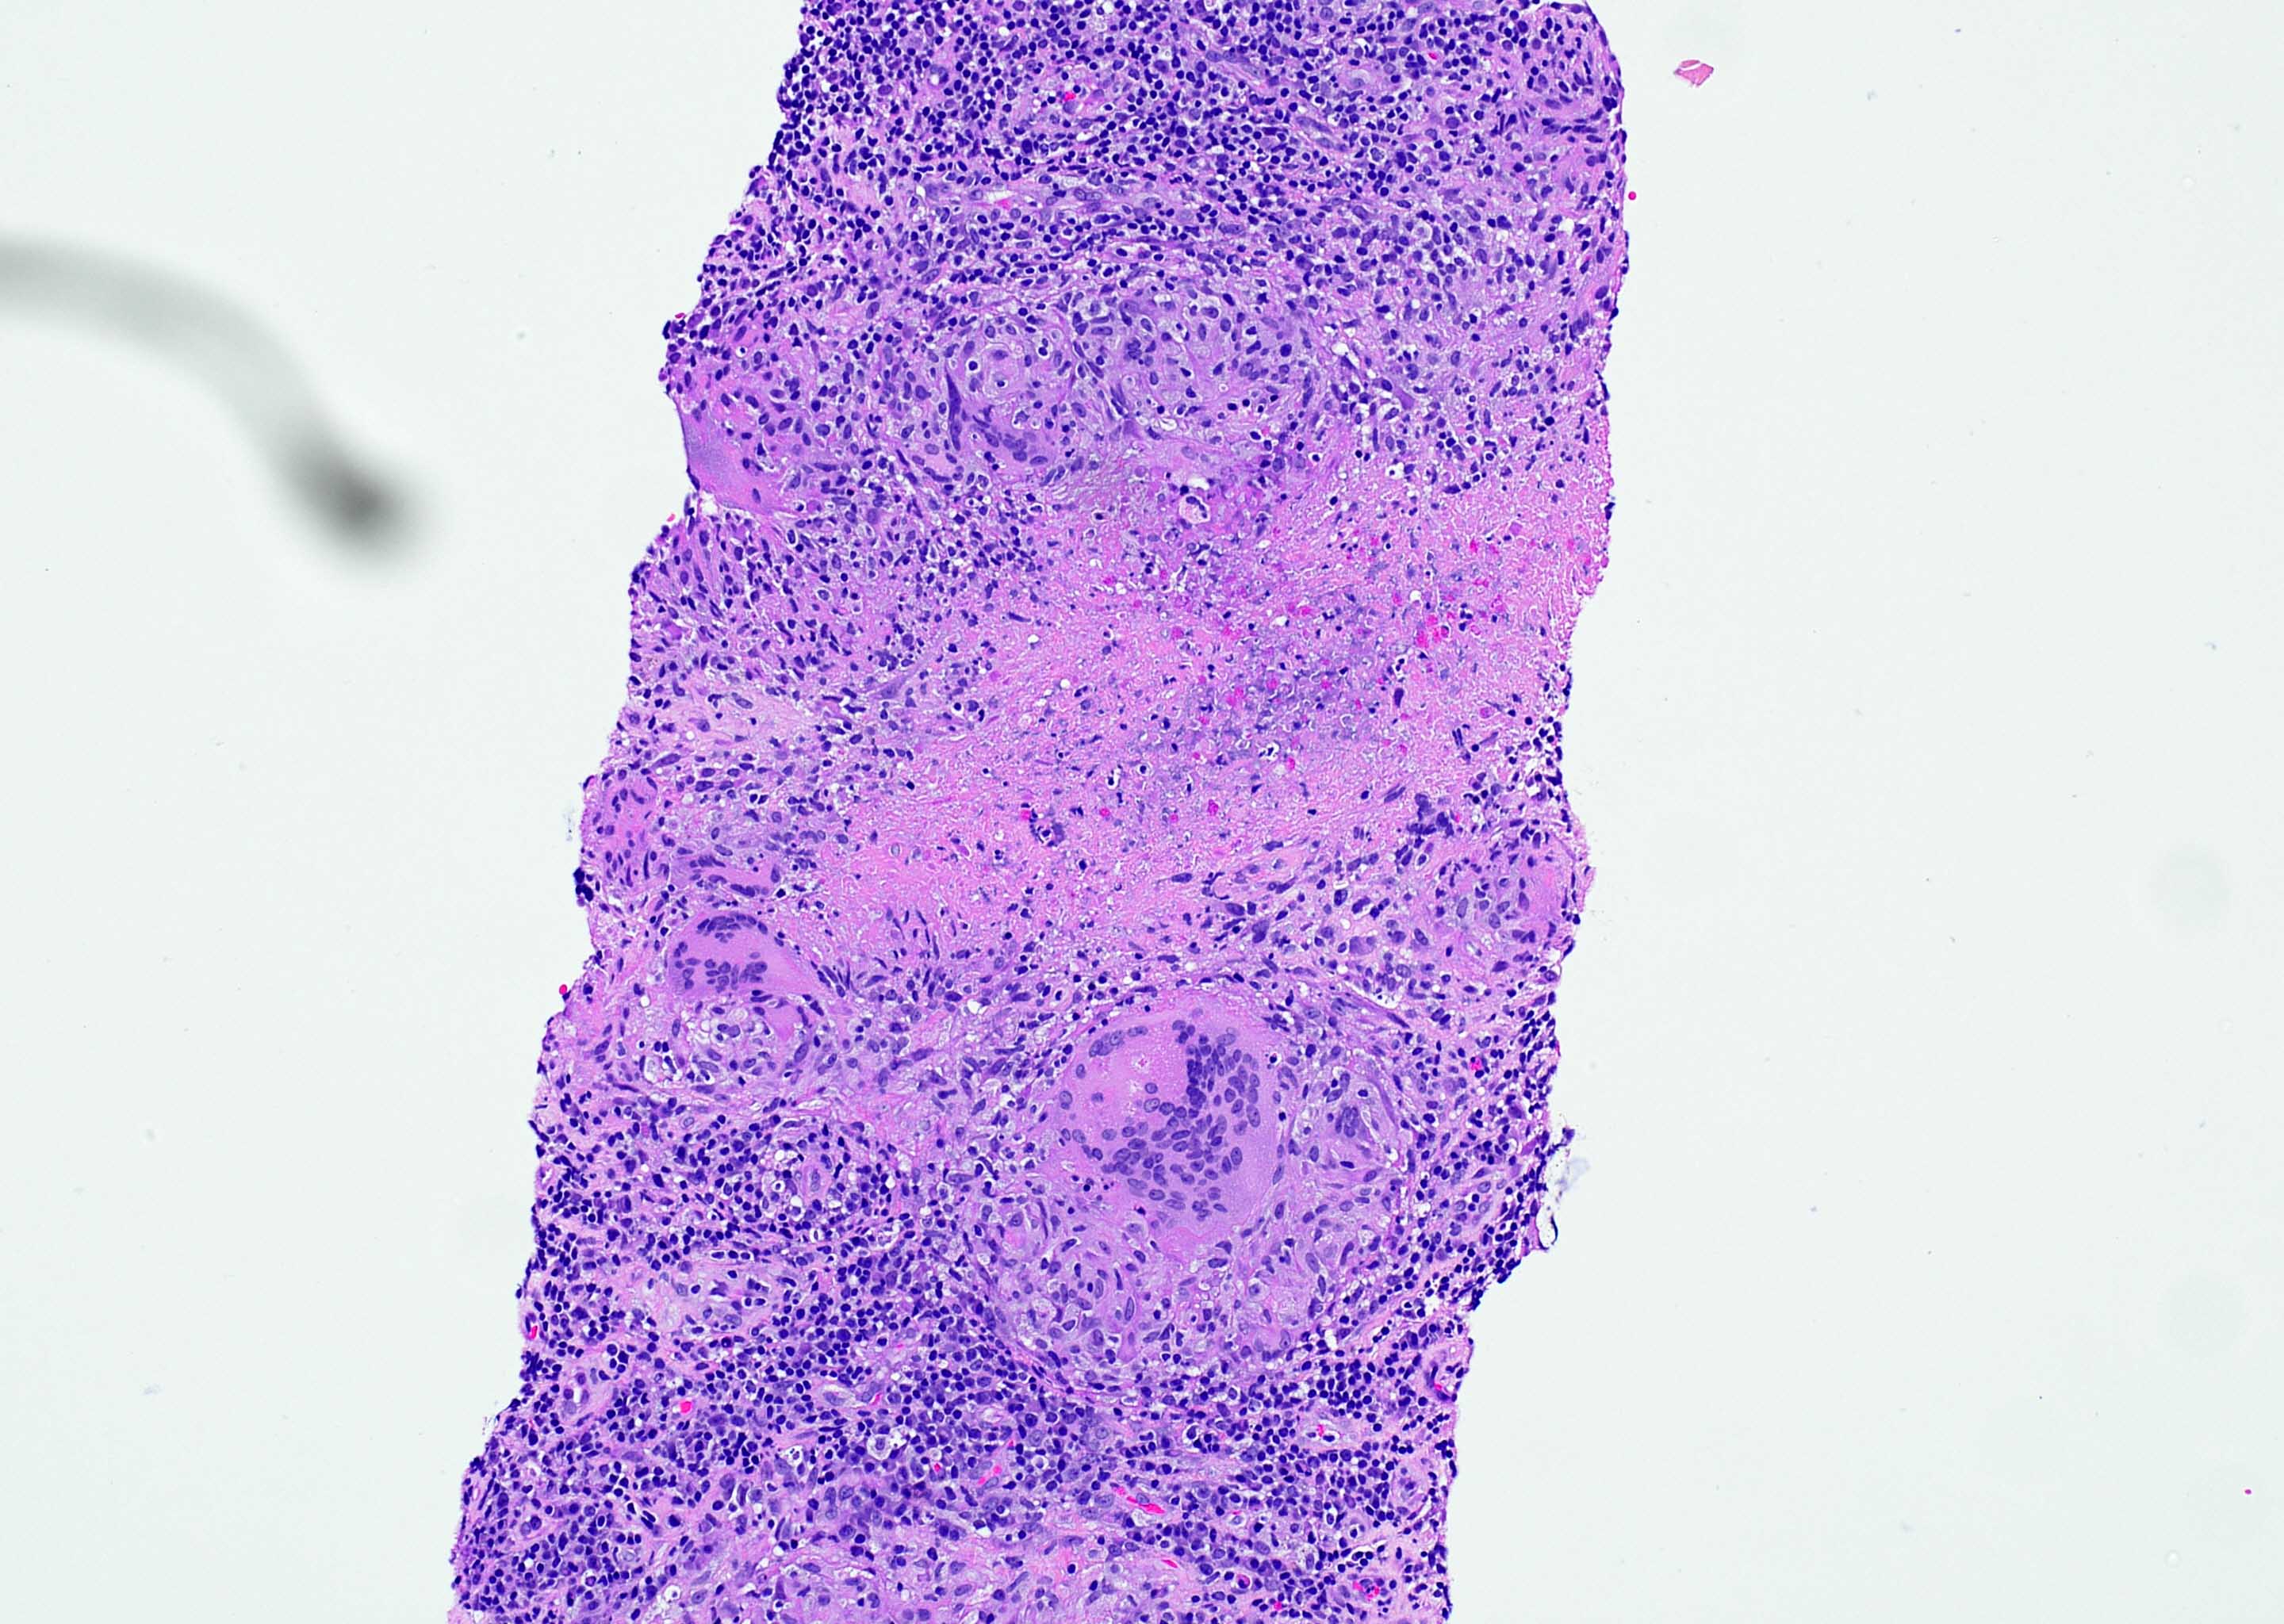 Necrotizing granuloma in a cervical lymph node